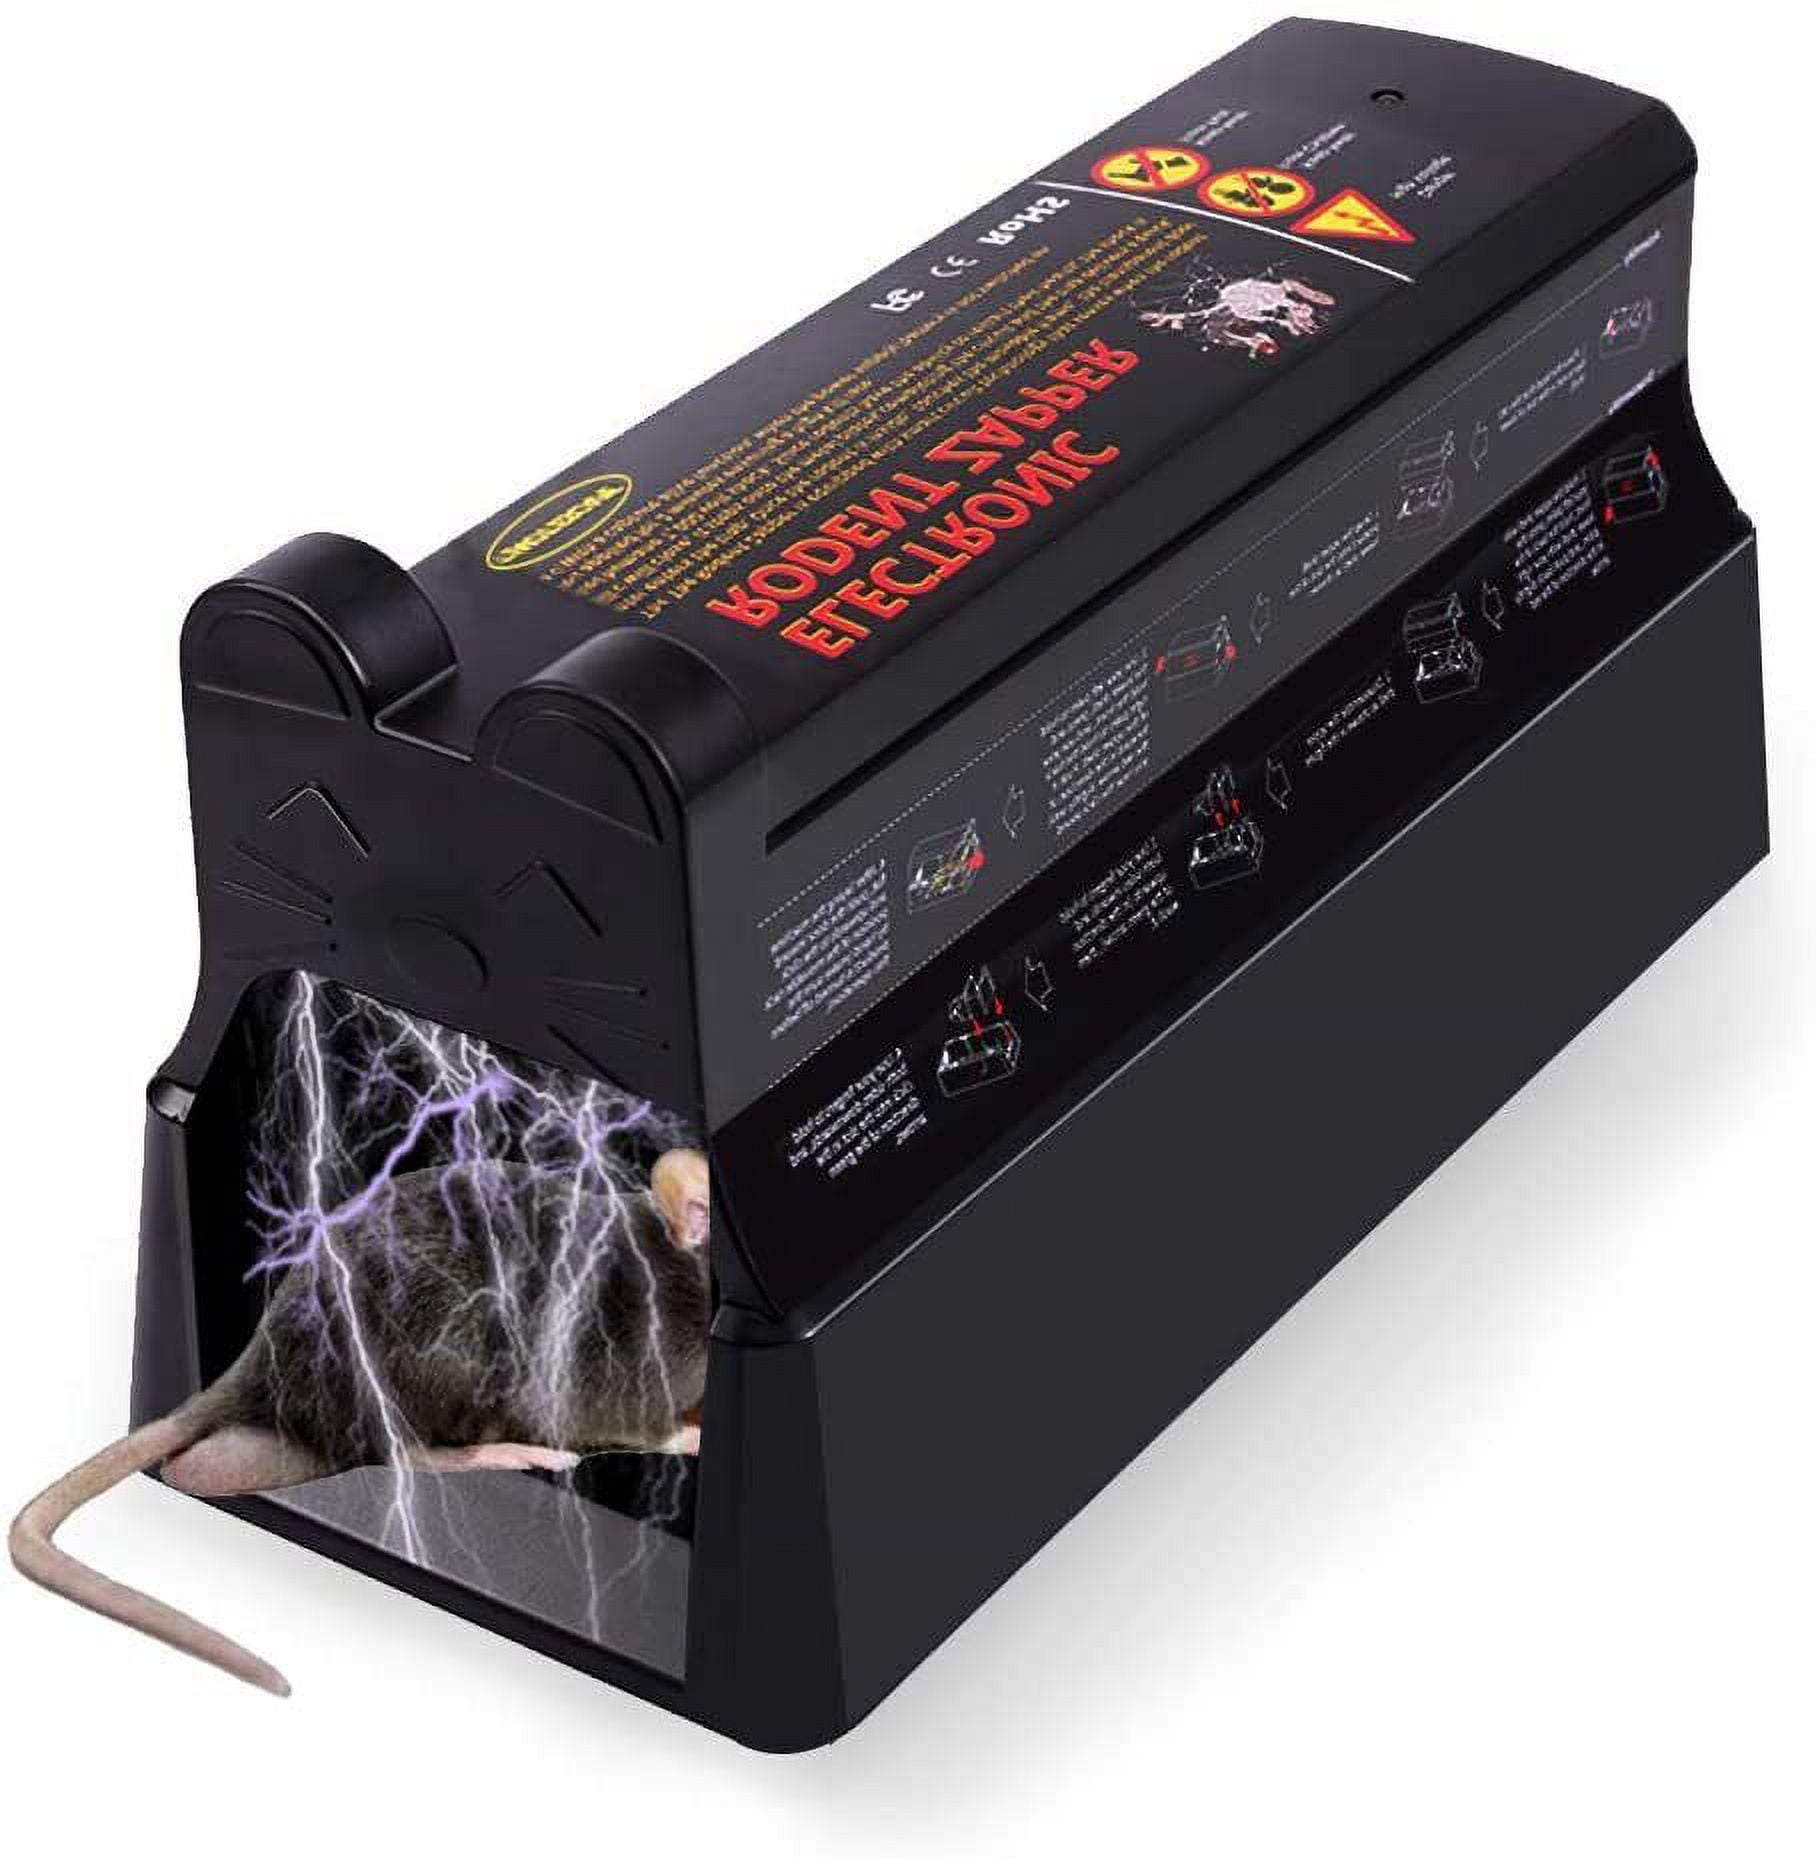 Electronic Mouse Trap Mice Rat Killer Victor Pest Control Electric Rodent  Zapper